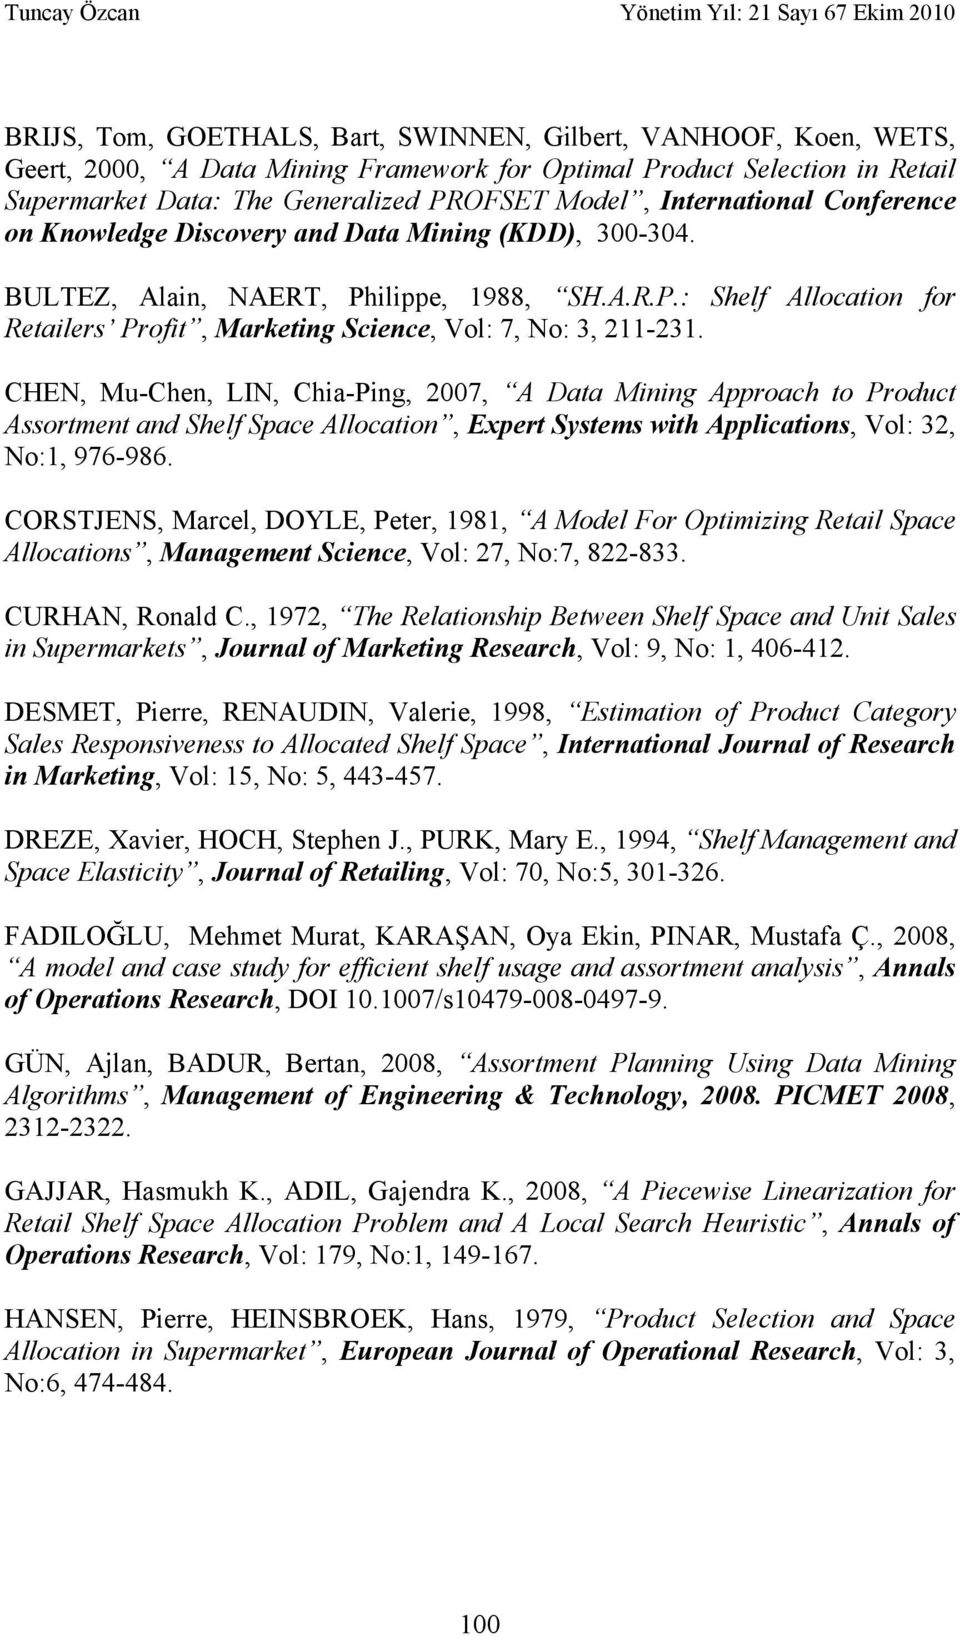 CHEN, Mu-Chen, LIN, Chia-Ping, 2007, A Data Mining Approach to Product Assortment and Shelf Space Allocation, Expert Systems with Applications, Vol: 32, No:1, 976-986.